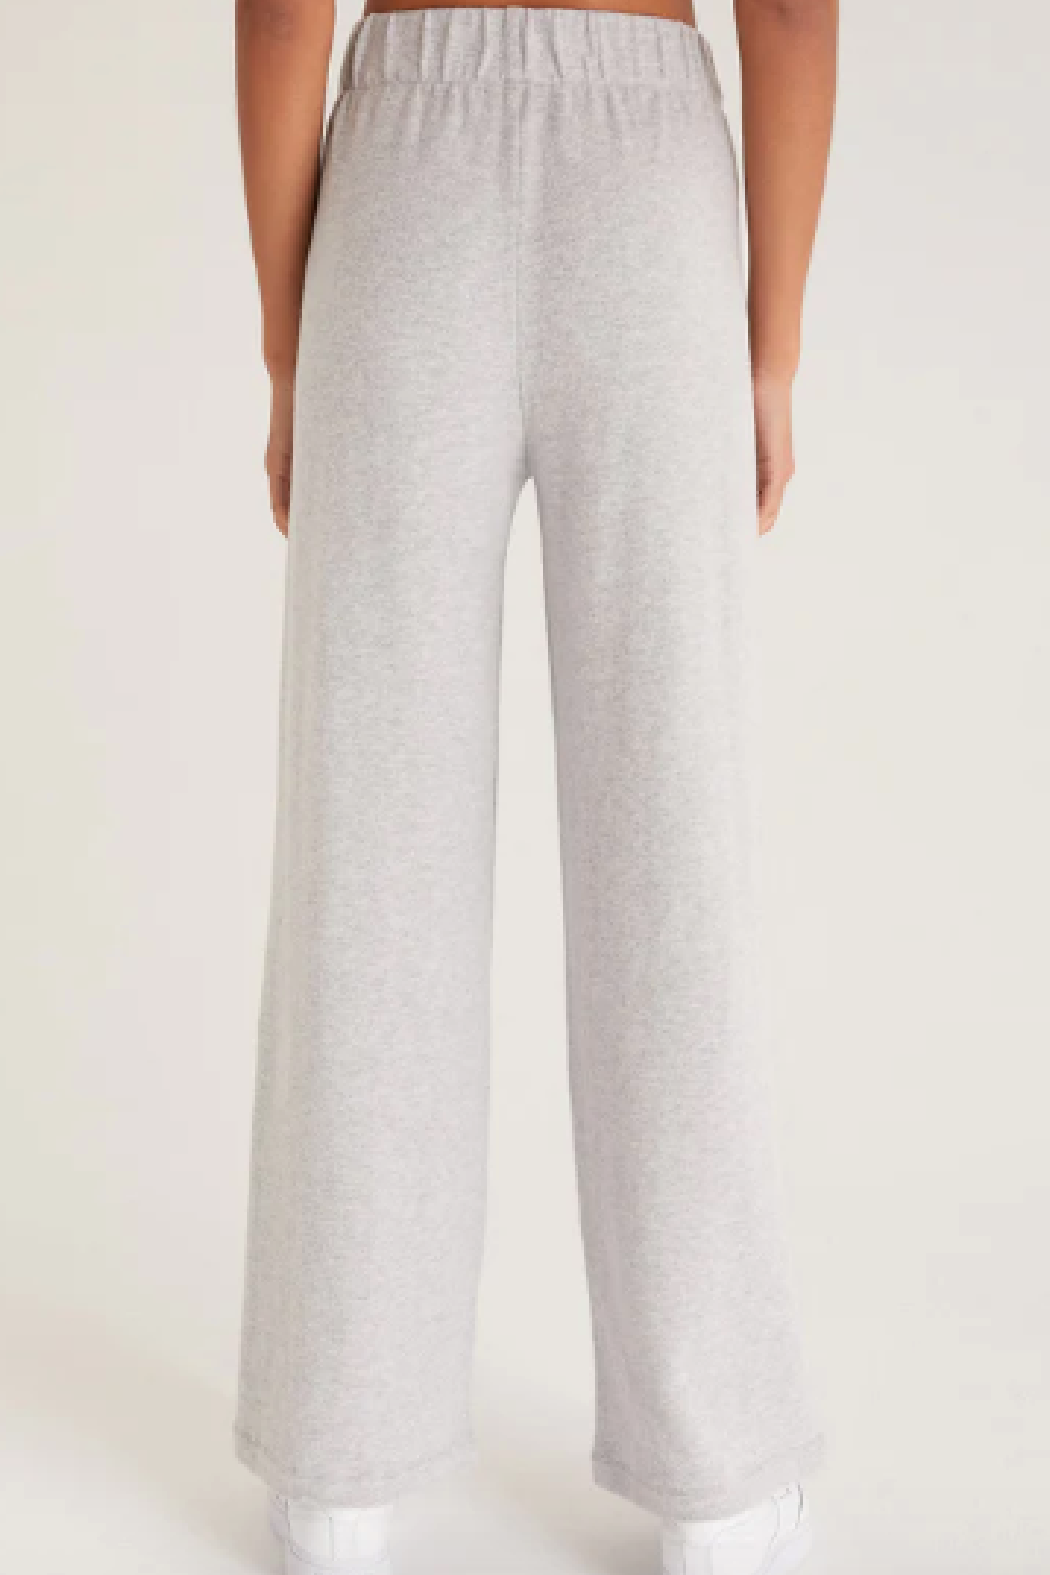 Olympia Plush Pant – The Old Mill